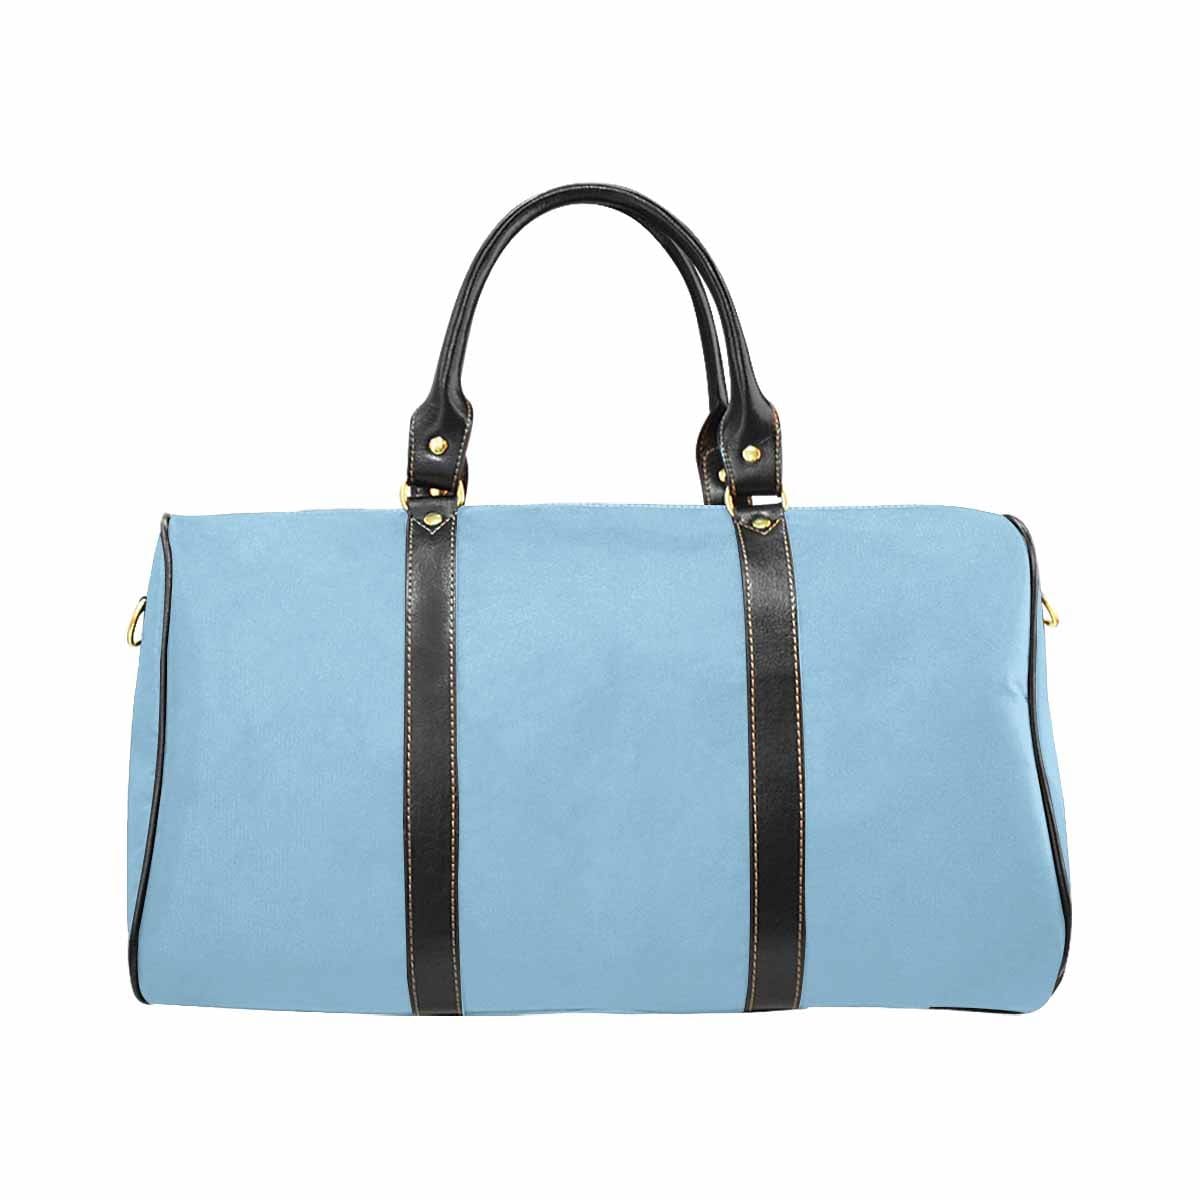 Travel Bag Leather Carry On Large Luggage Bag Cornflower Blue - Bags | Travel